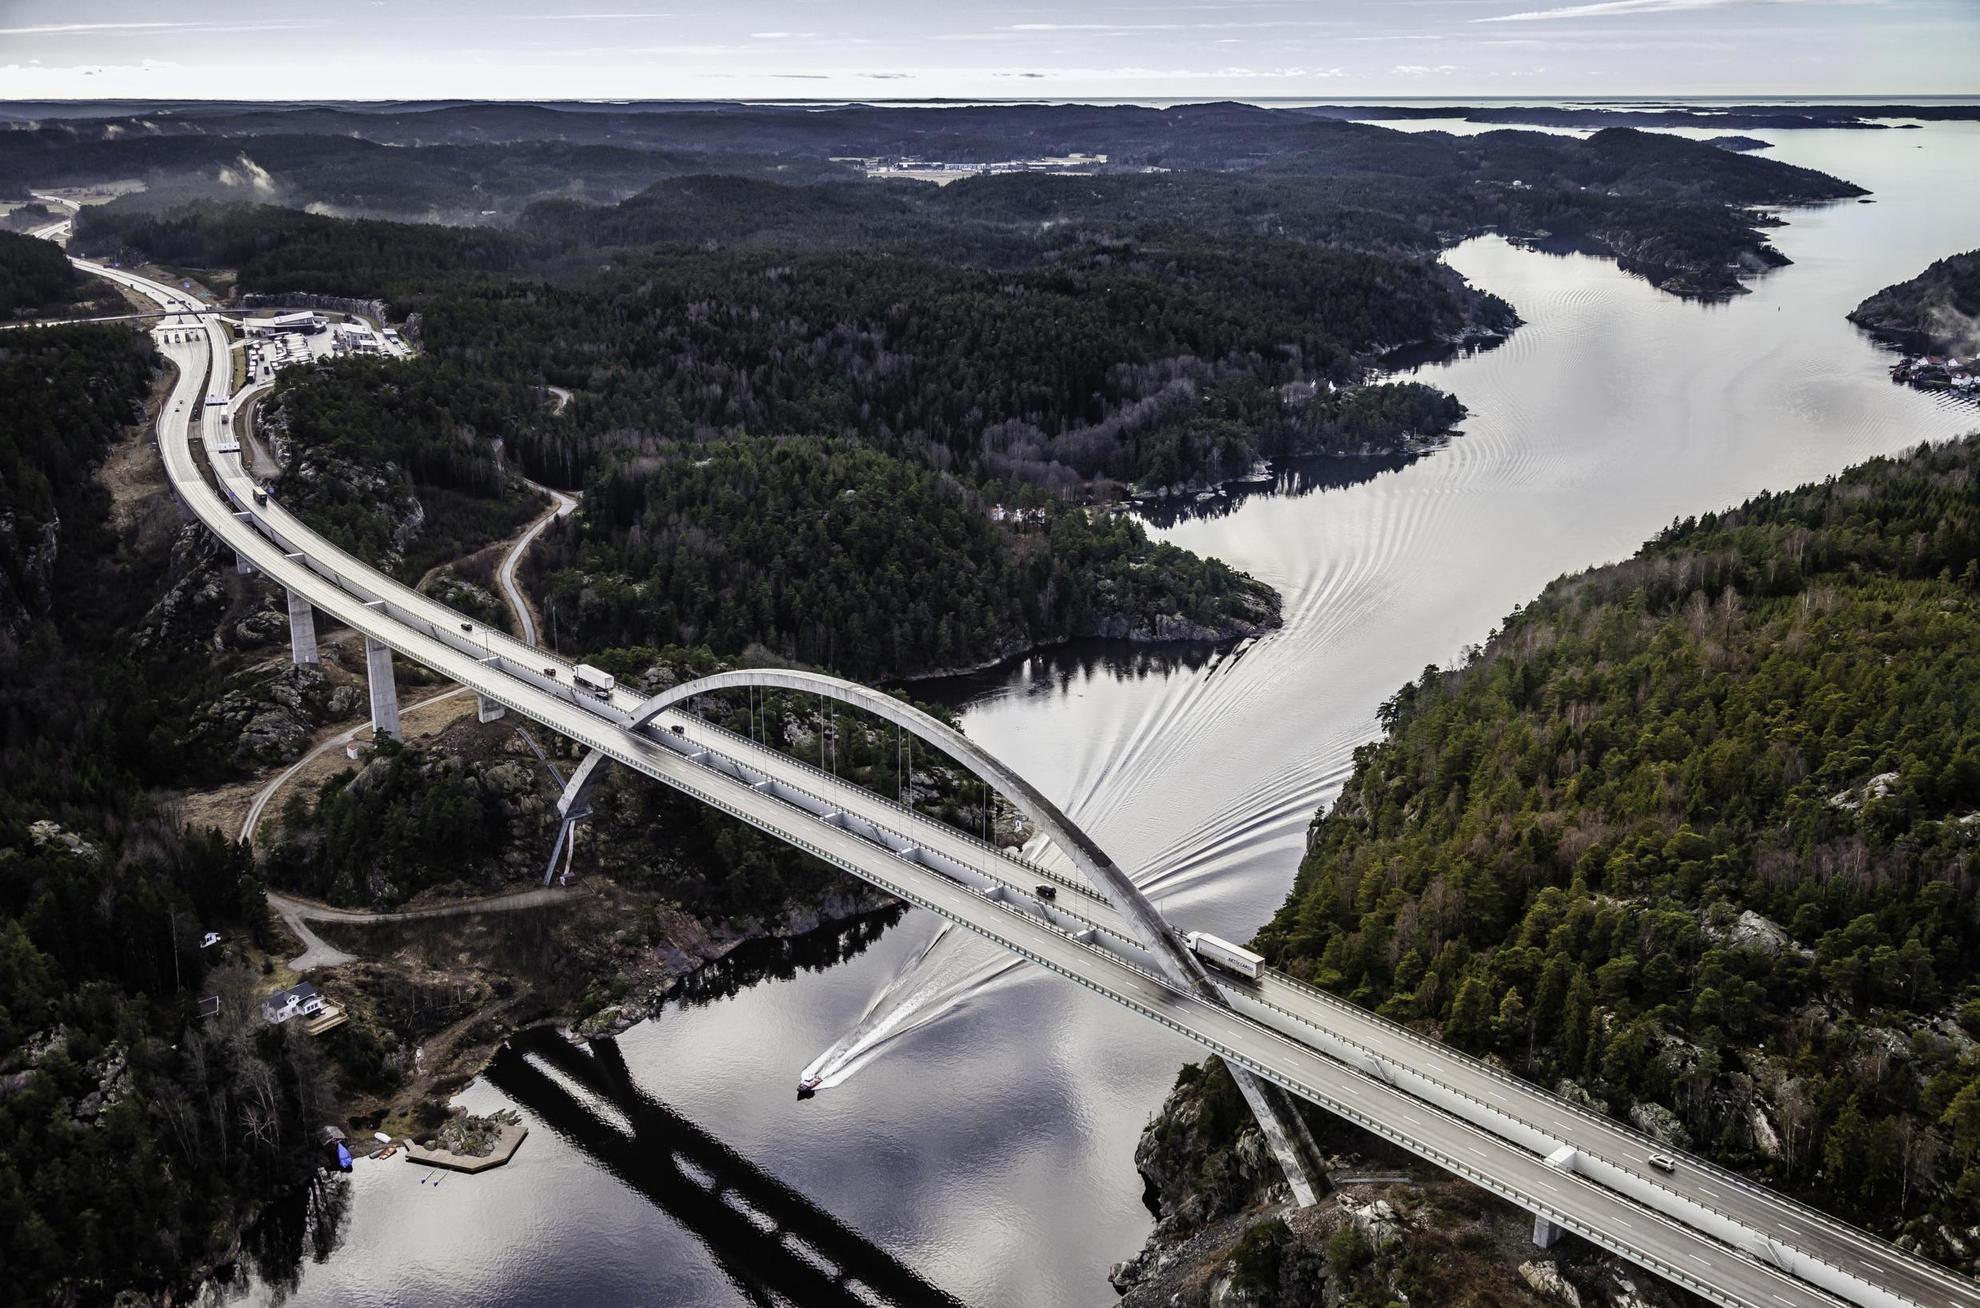 The Svinesund Bridge has traffic on it, and underneath a motorboat is racing. The landscape on both sides of the bridge is hilly.